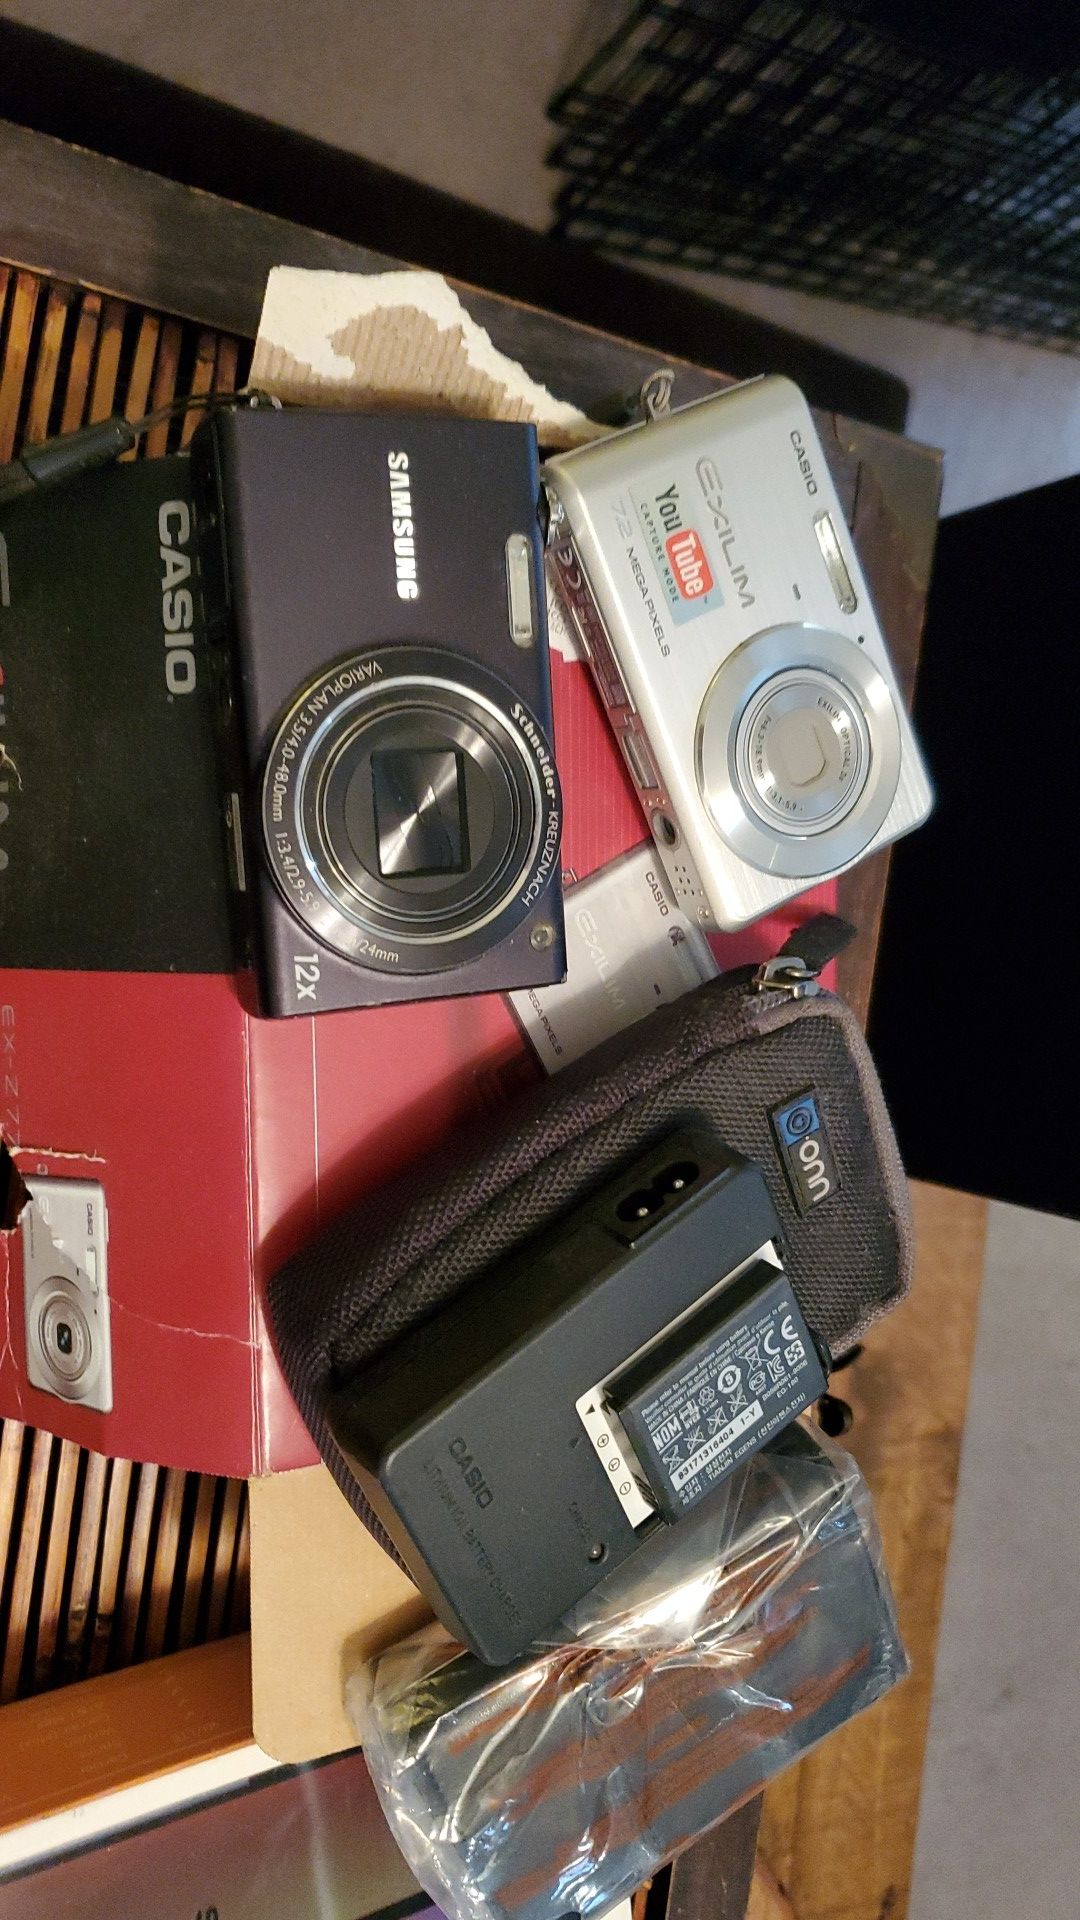 Very nice digital cameras with batteries cases one even has the Box both of them the very nice and work